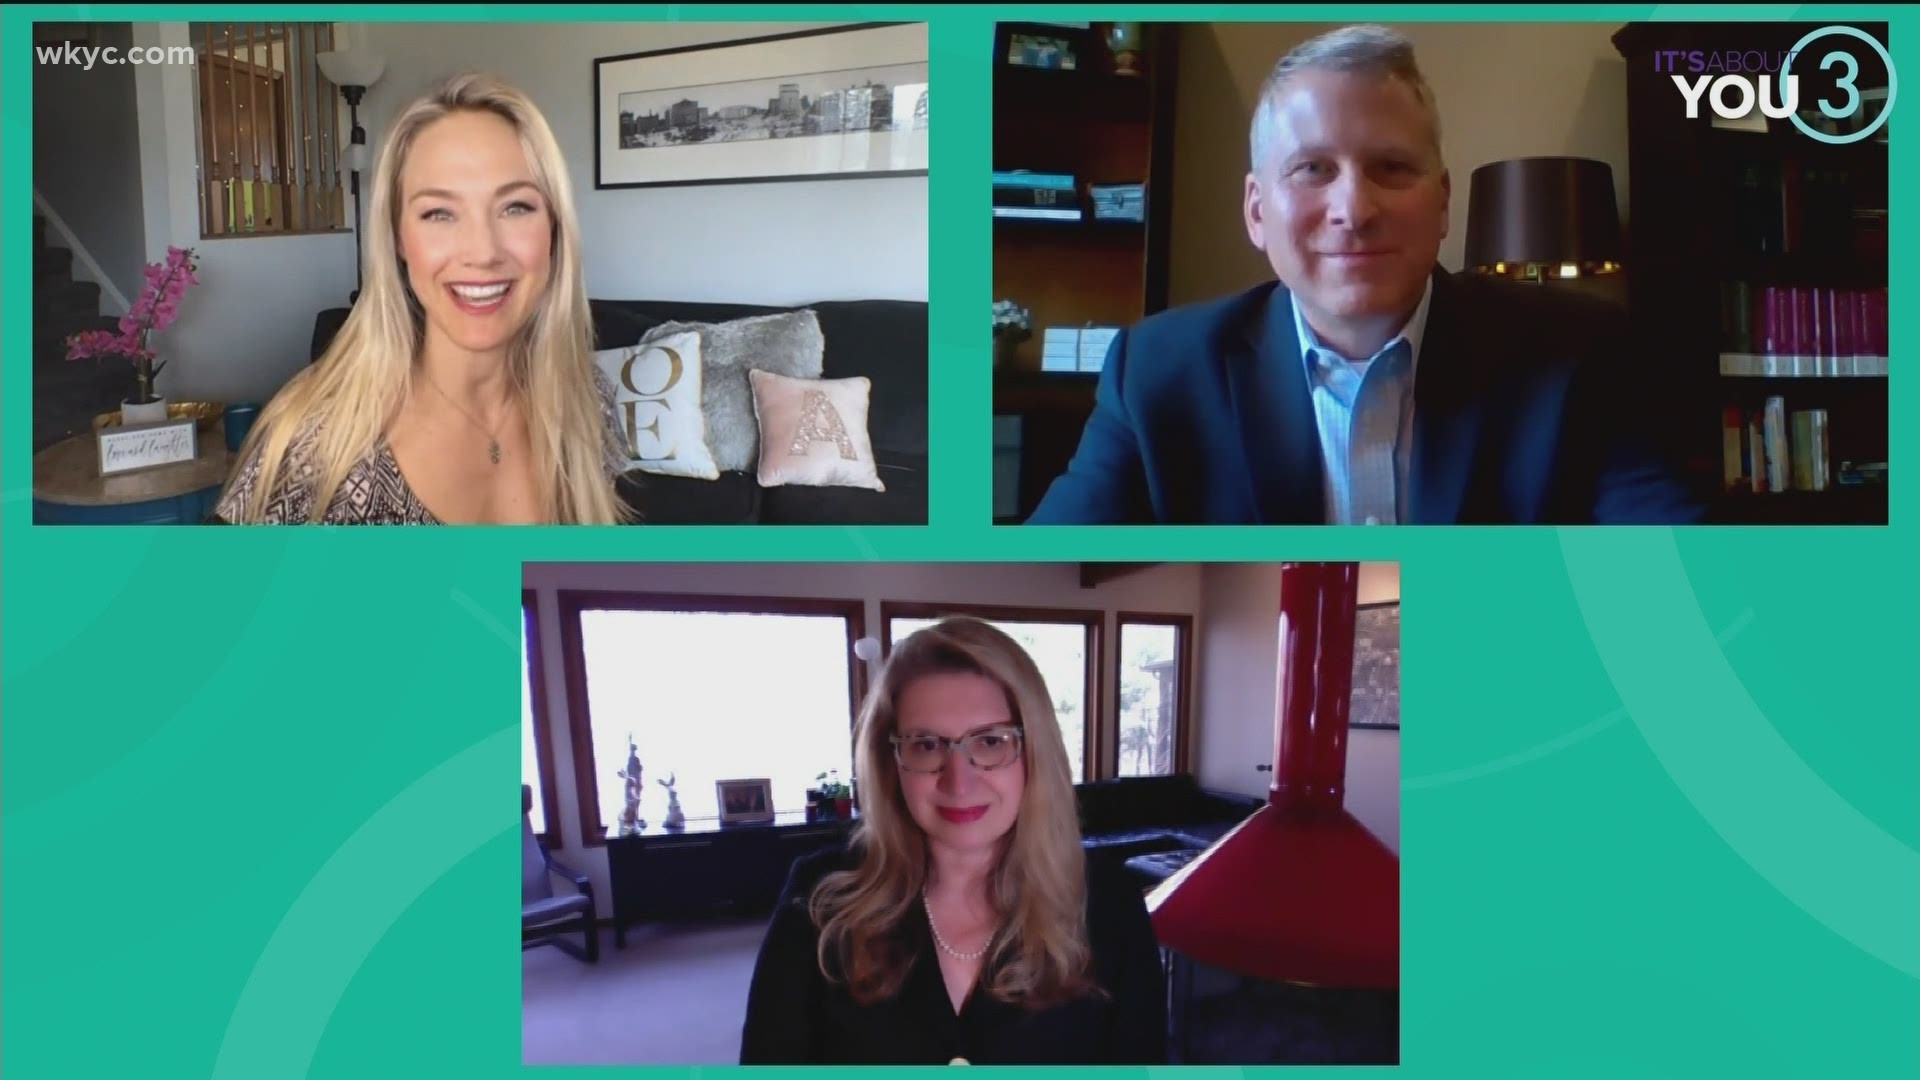 Mentor Monday is over but you can still become a mentor! Alexa talks with two mentors, Kate Wensink and Dave Kall, about the process and the joy mentoring brings.